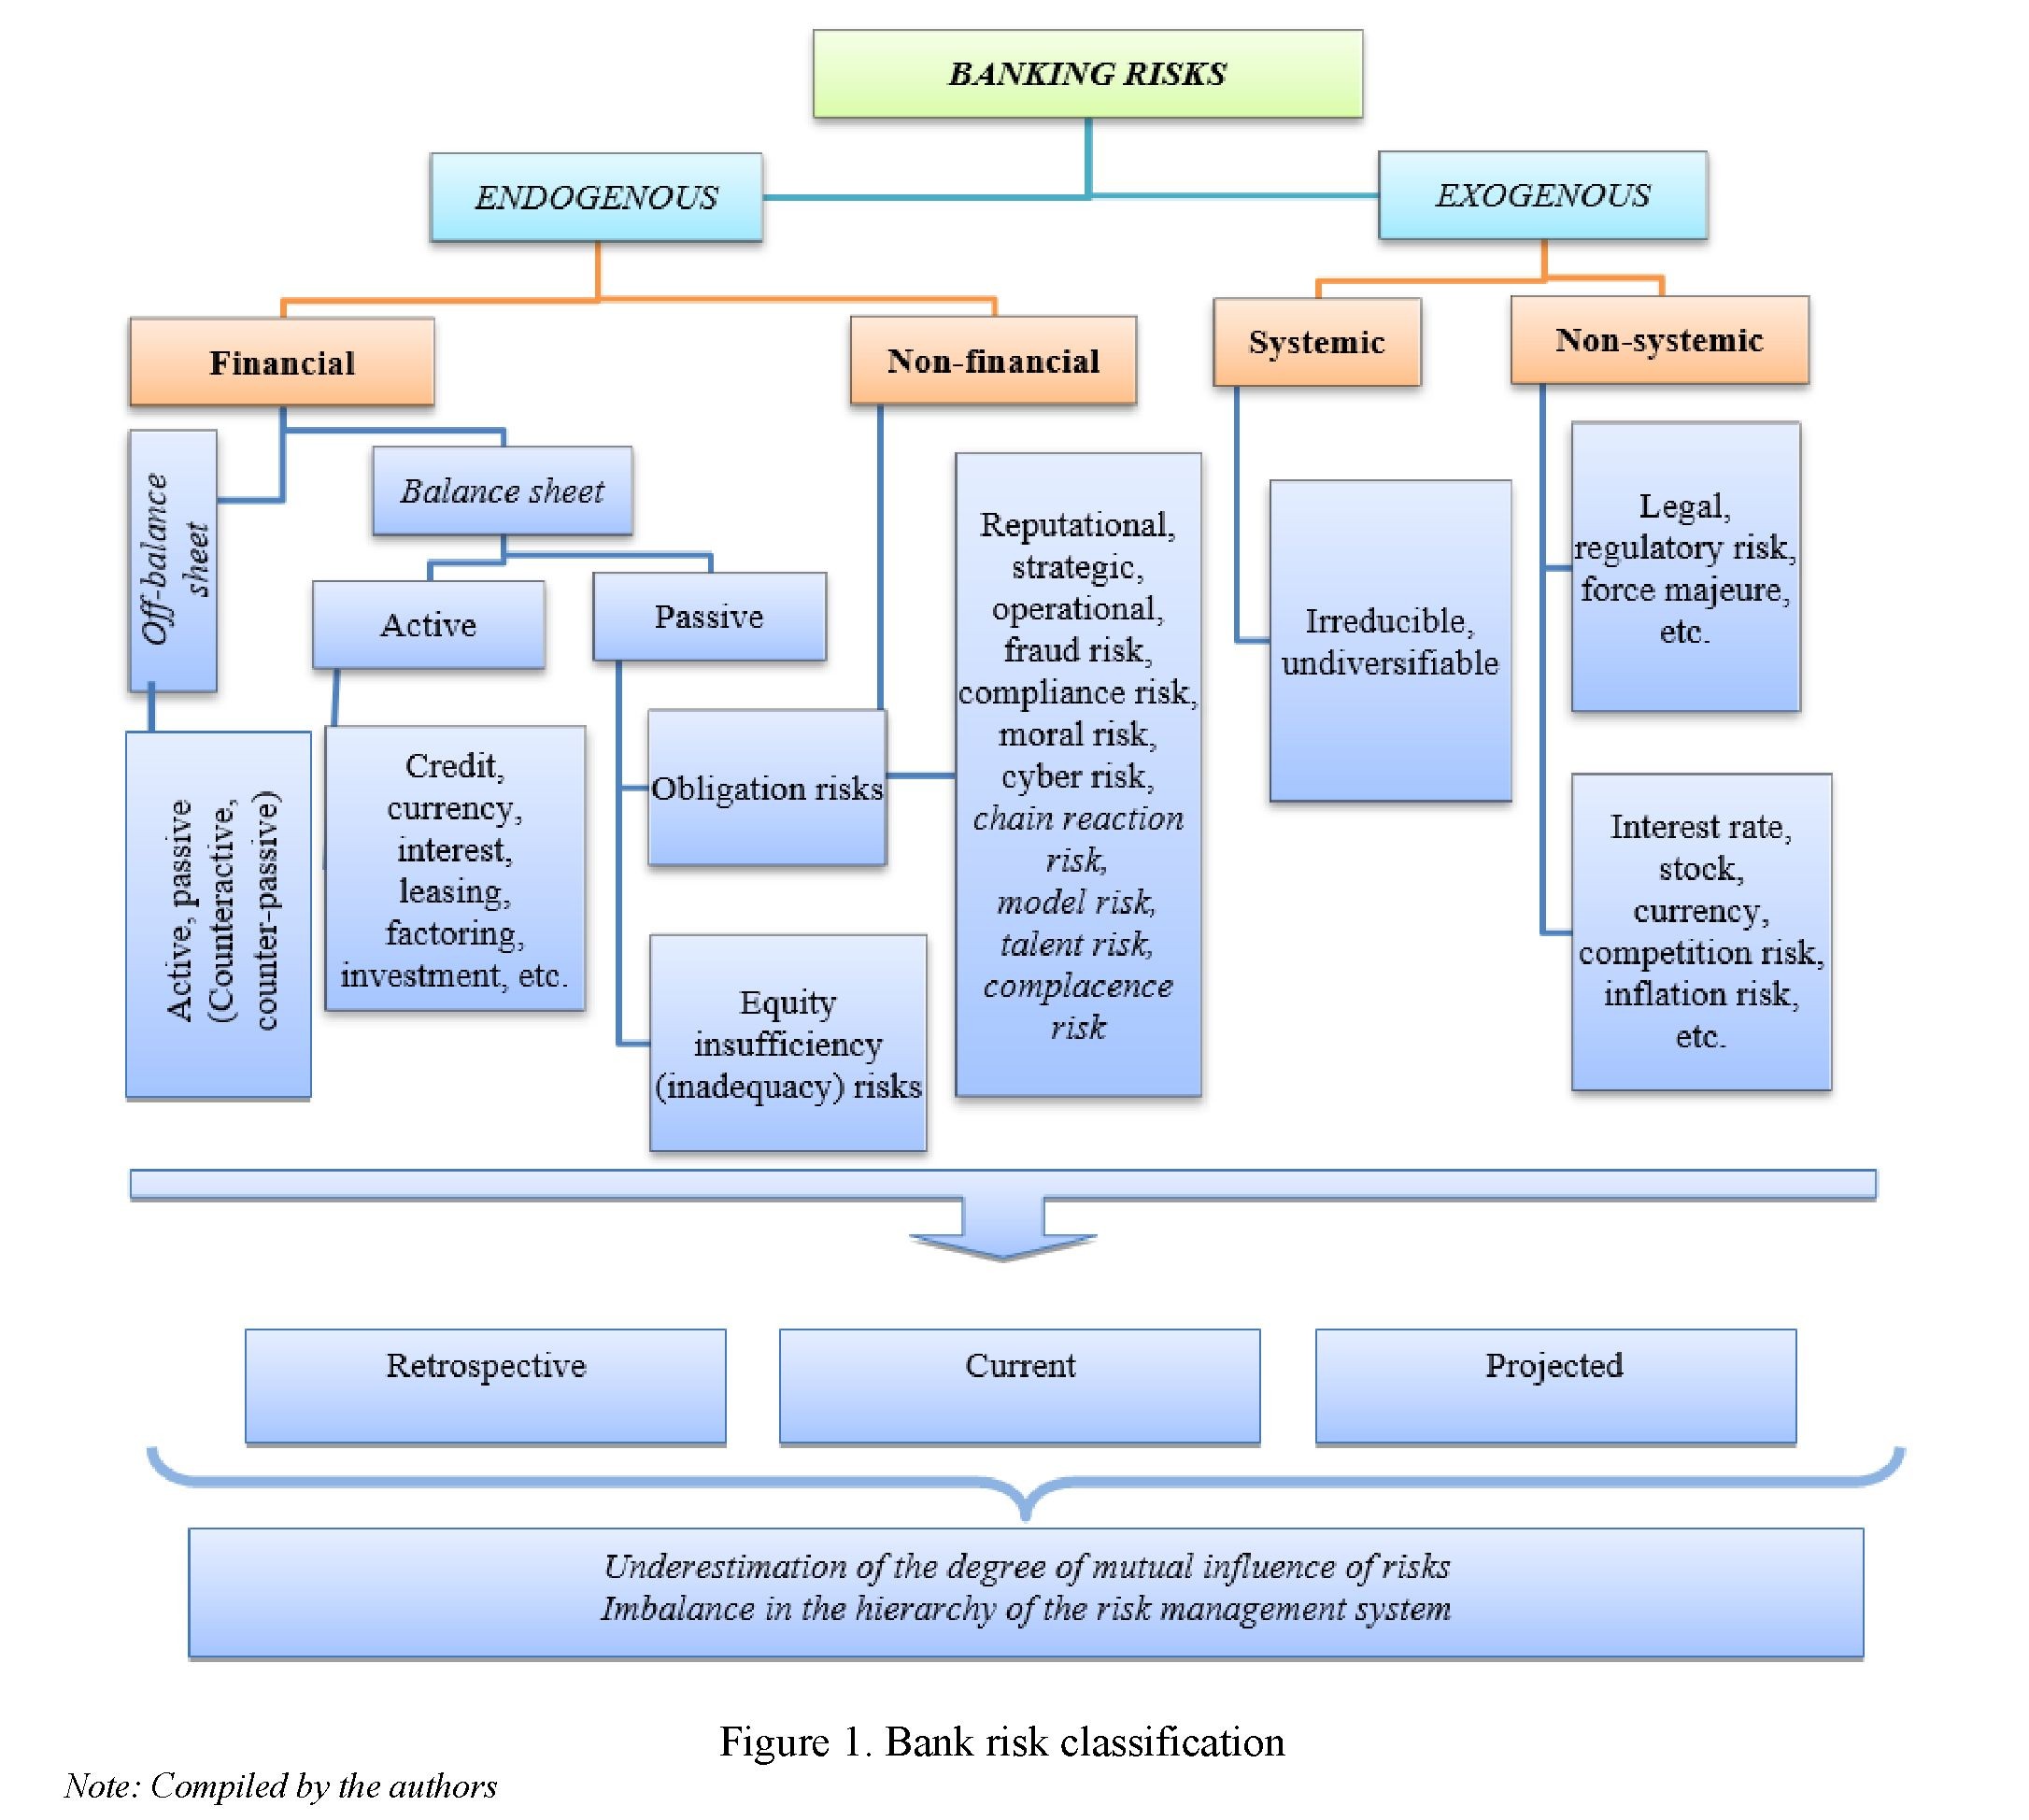 The Conceptual Basis of an Integrated Risk Management System for Second-Tier Banks